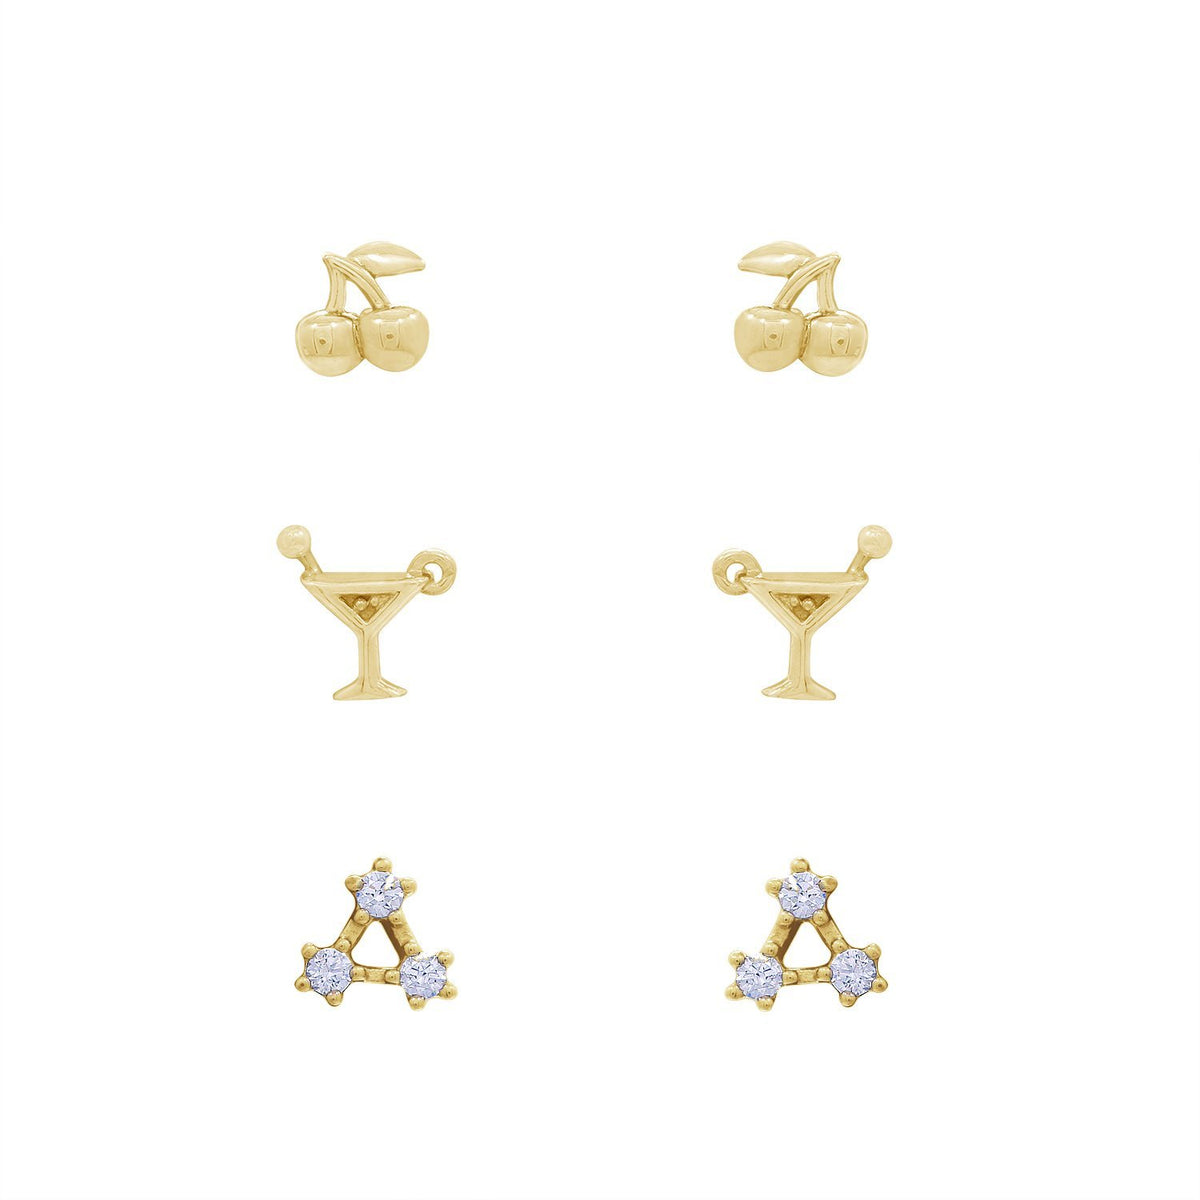 GEMOUR 14K Yellow Gold Clad Sterling Silver Cubic Zirconia Summer Minimal Earring Set, Cherry, Cocktail and Three Star Earrings - GEMOUR